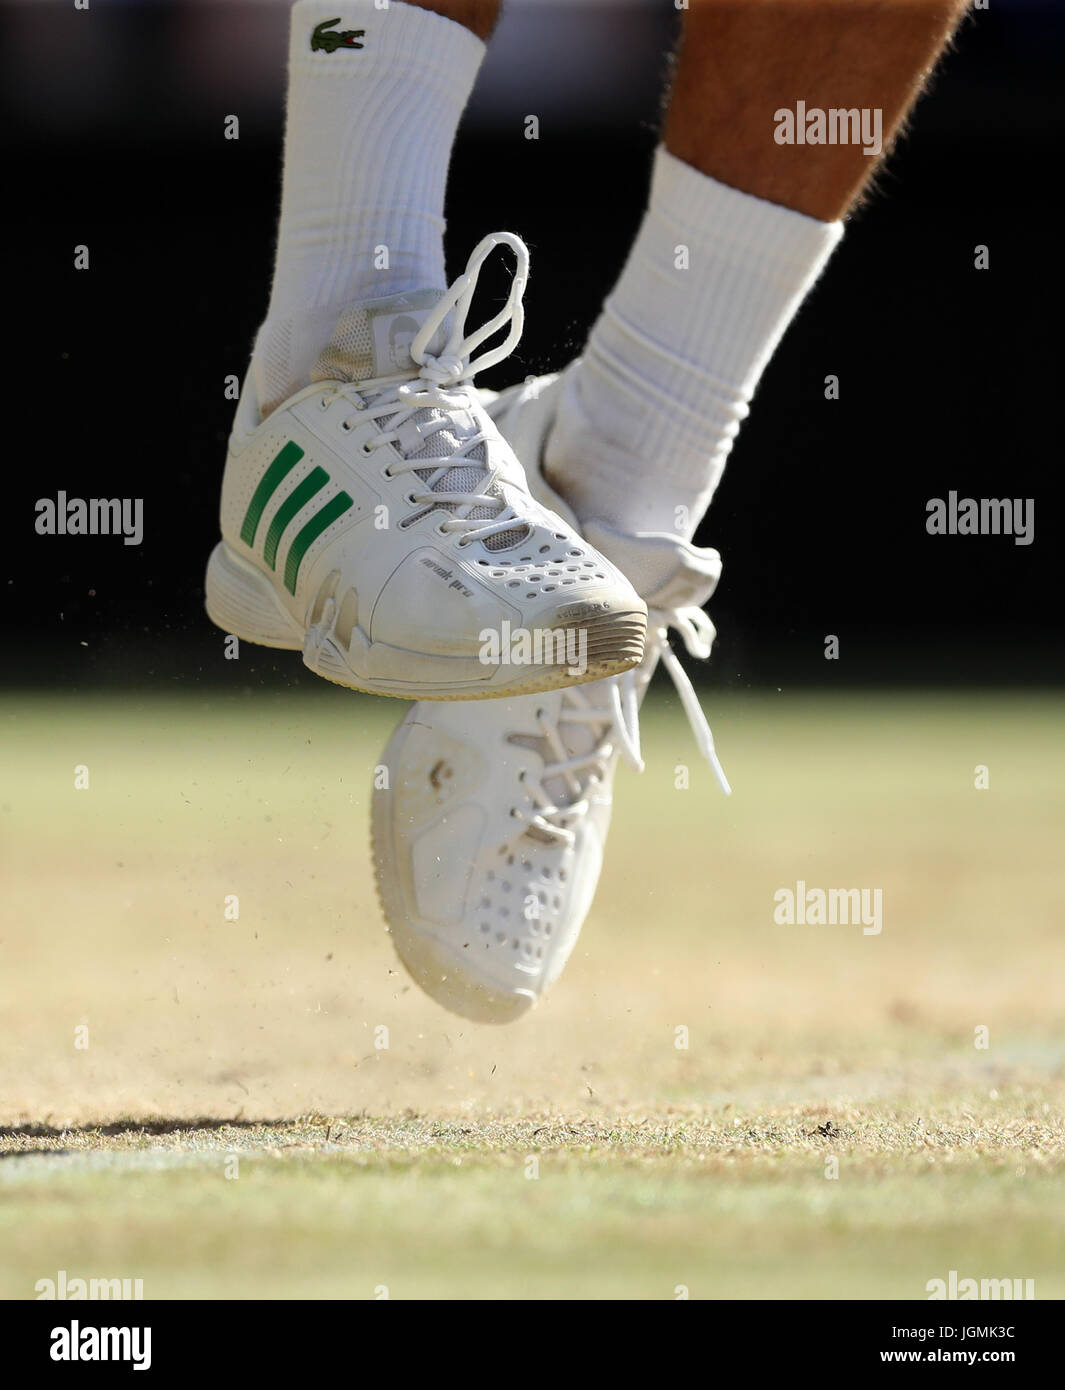 The Adidas trainers of Novak Djokovic on day six of the Wimbledon  Championships at The All England Lawn Tennis and Croquet Club, Wimbledon.  PRESS ASSOCIATION Photo. Picture date: Saturday July 8, 2017.